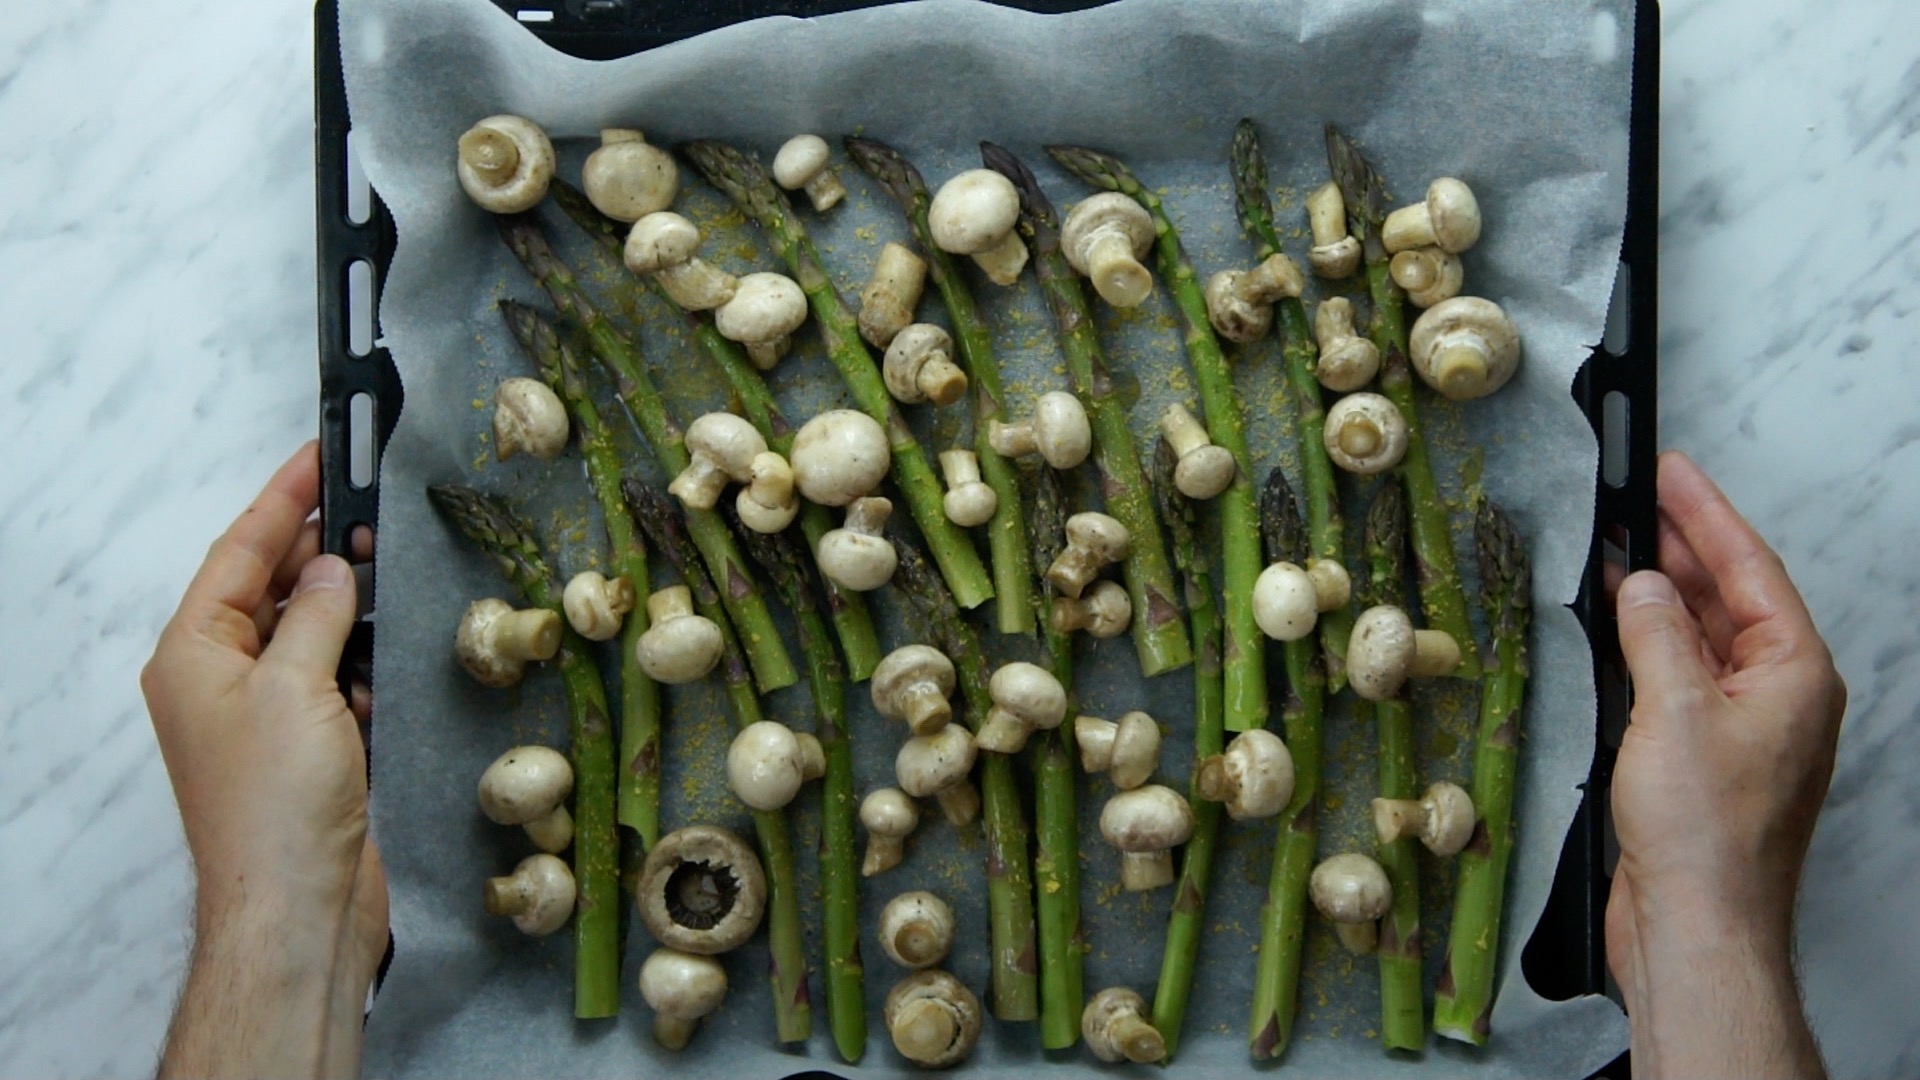 Green asparagus and small mushrooms on a baking sheet and parchment paper sprinkled with salt, black pepper, and yellow flakes.